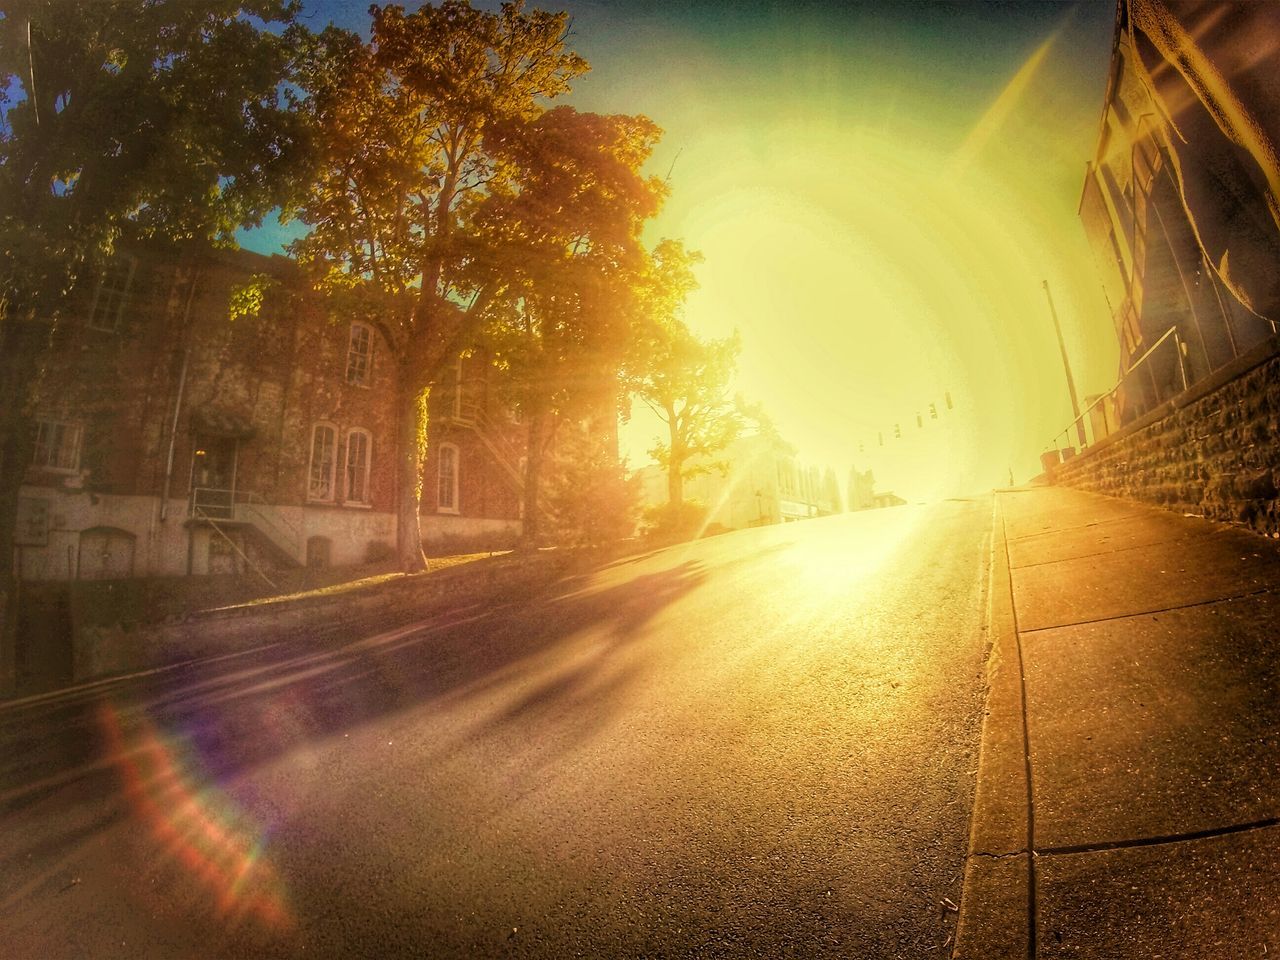 the way forward, transportation, sunbeam, sun, lens flare, sunlight, road, tree, diminishing perspective, street, vanishing point, built structure, sky, no people, outdoors, car, sunny, empty, architecture, building exterior